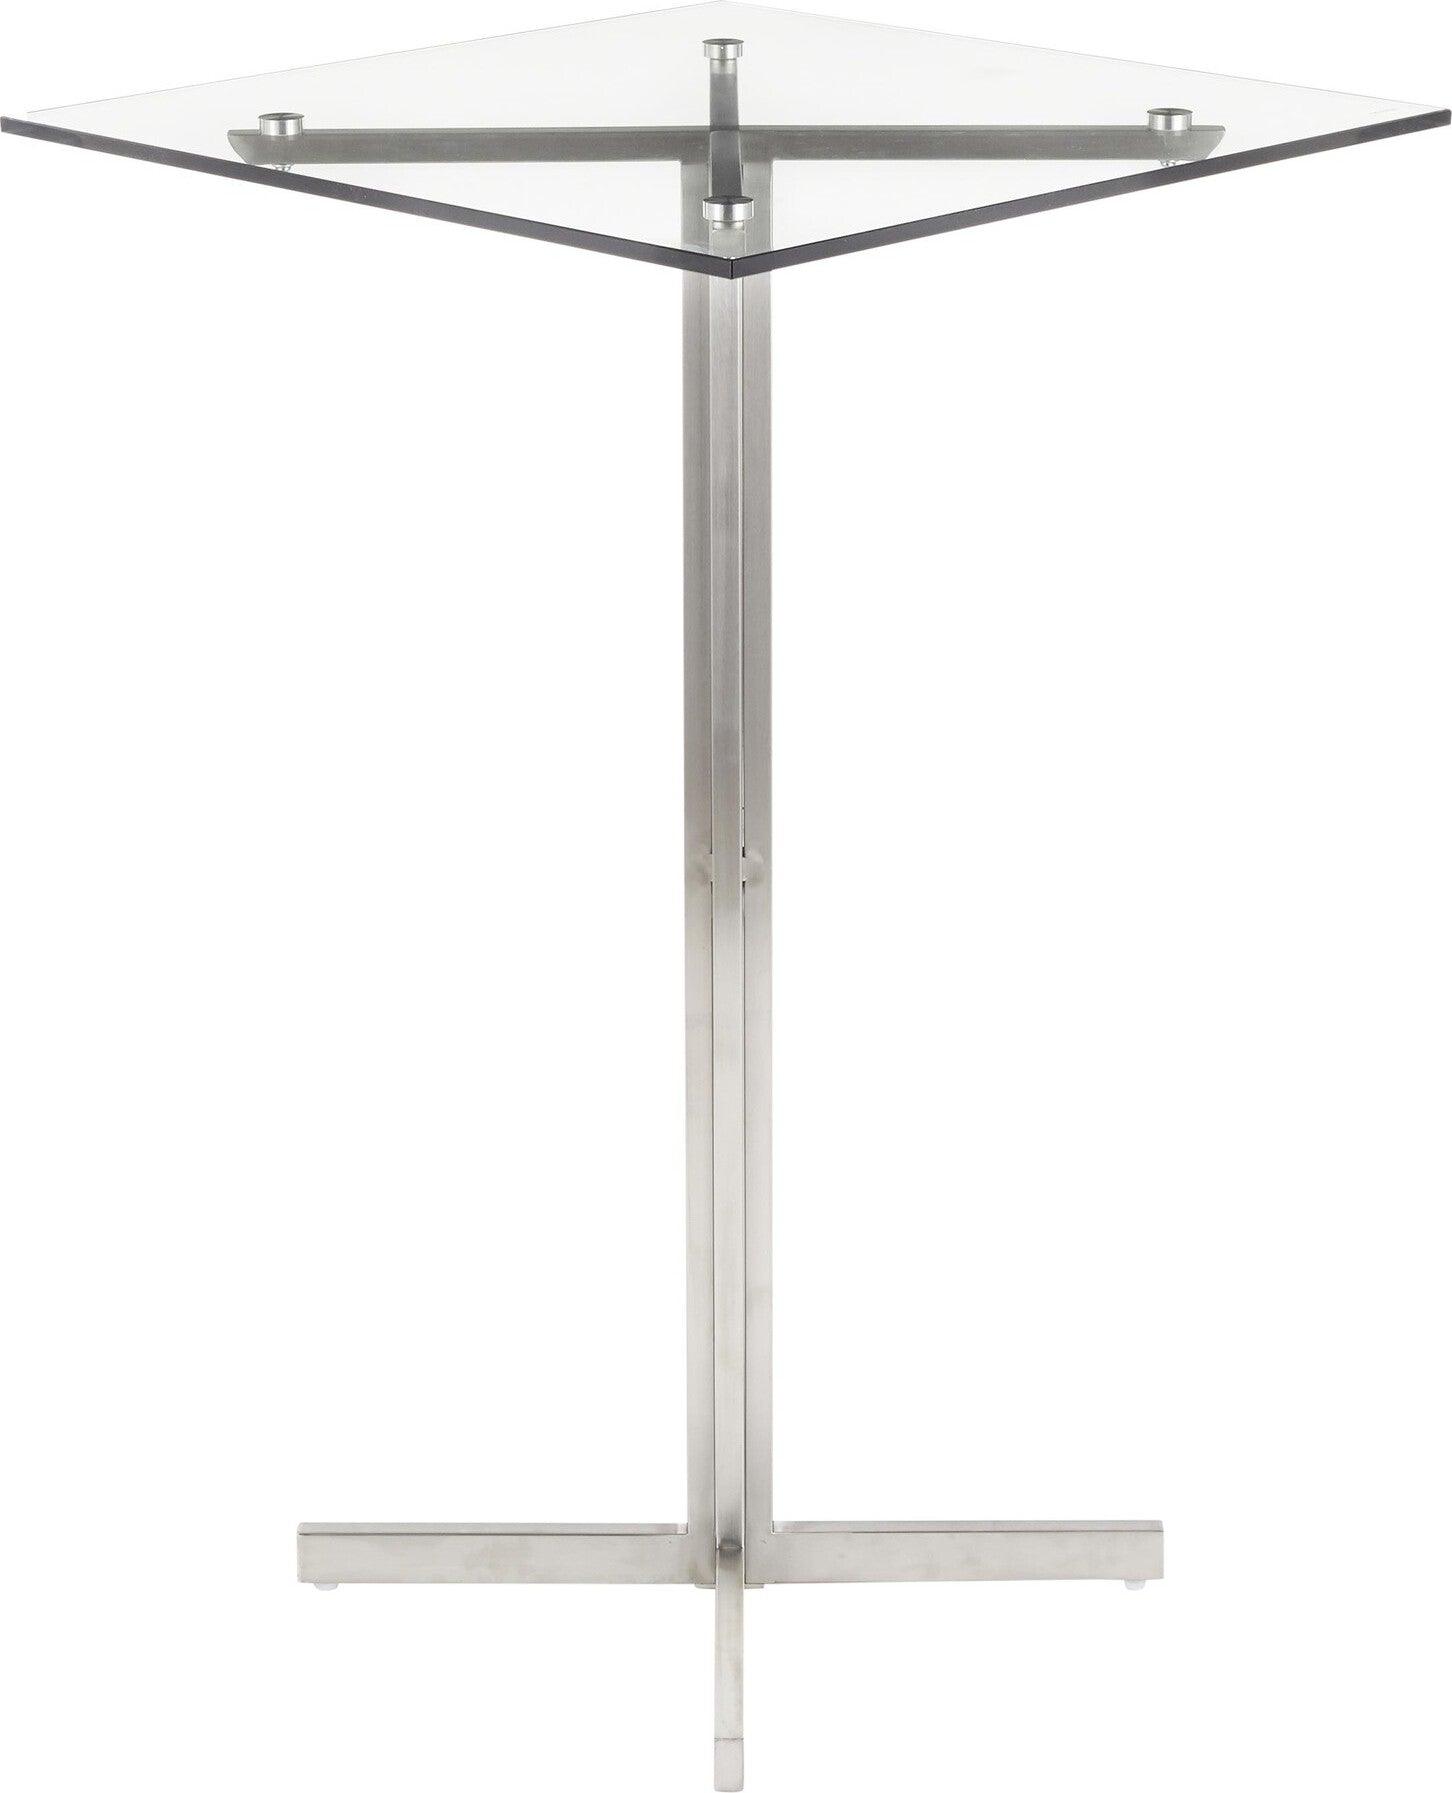 Lumisource Bar Tables - Fuji Contemporary Square Bar Table in Stainless Steel with Clear Glass Top